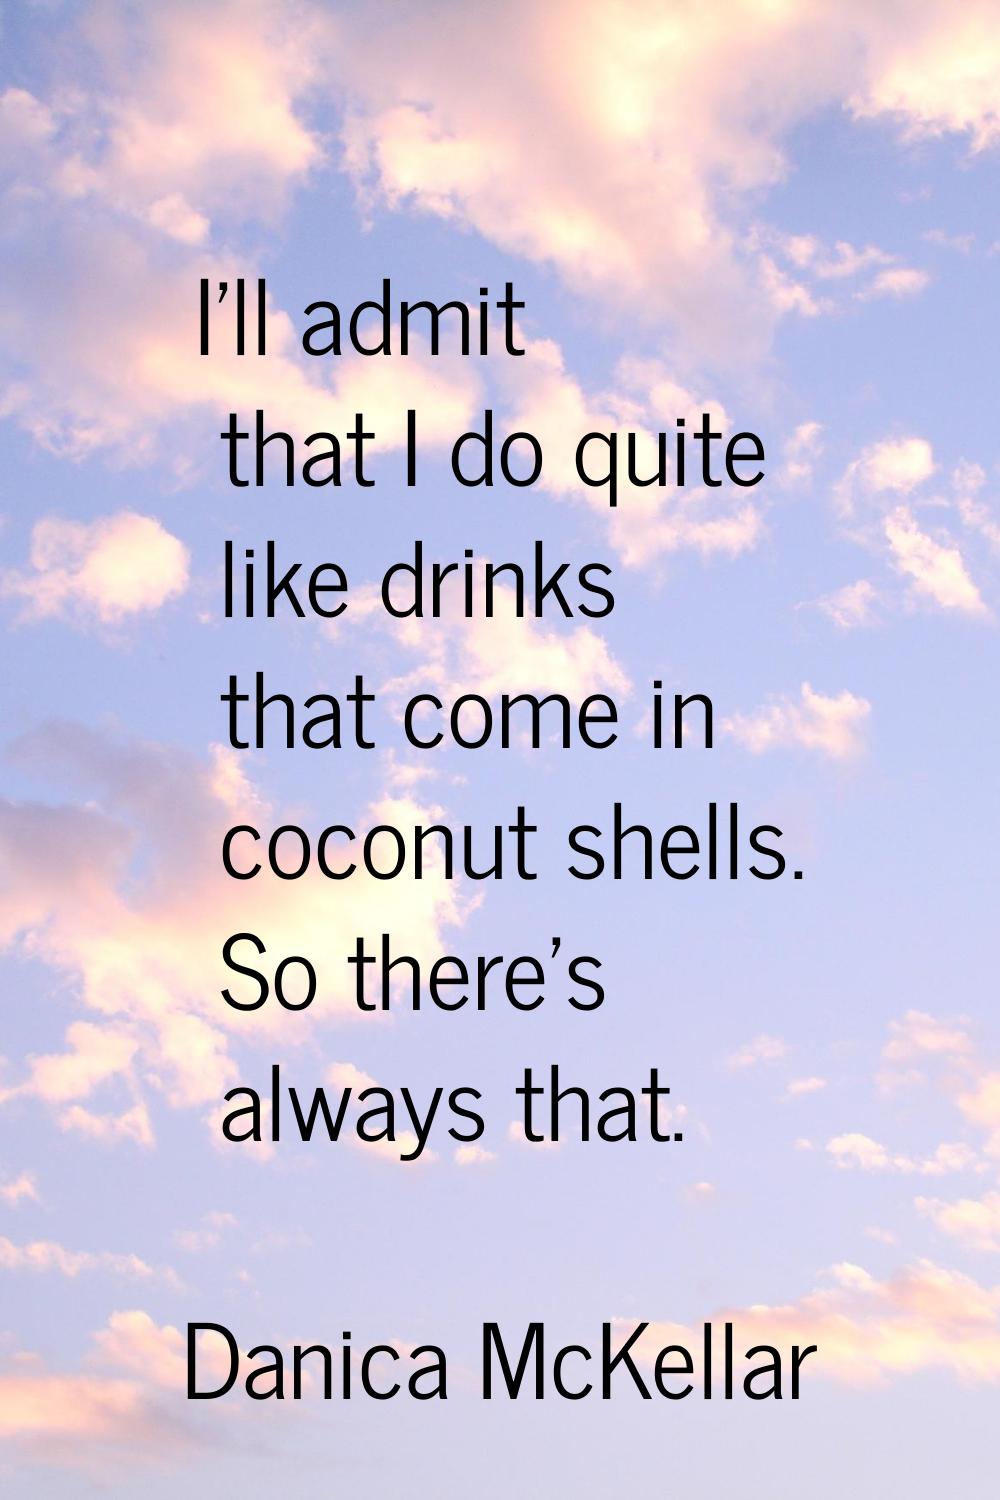 I'll admit that I do quite like drinks that come in coconut shells. So there's always that.